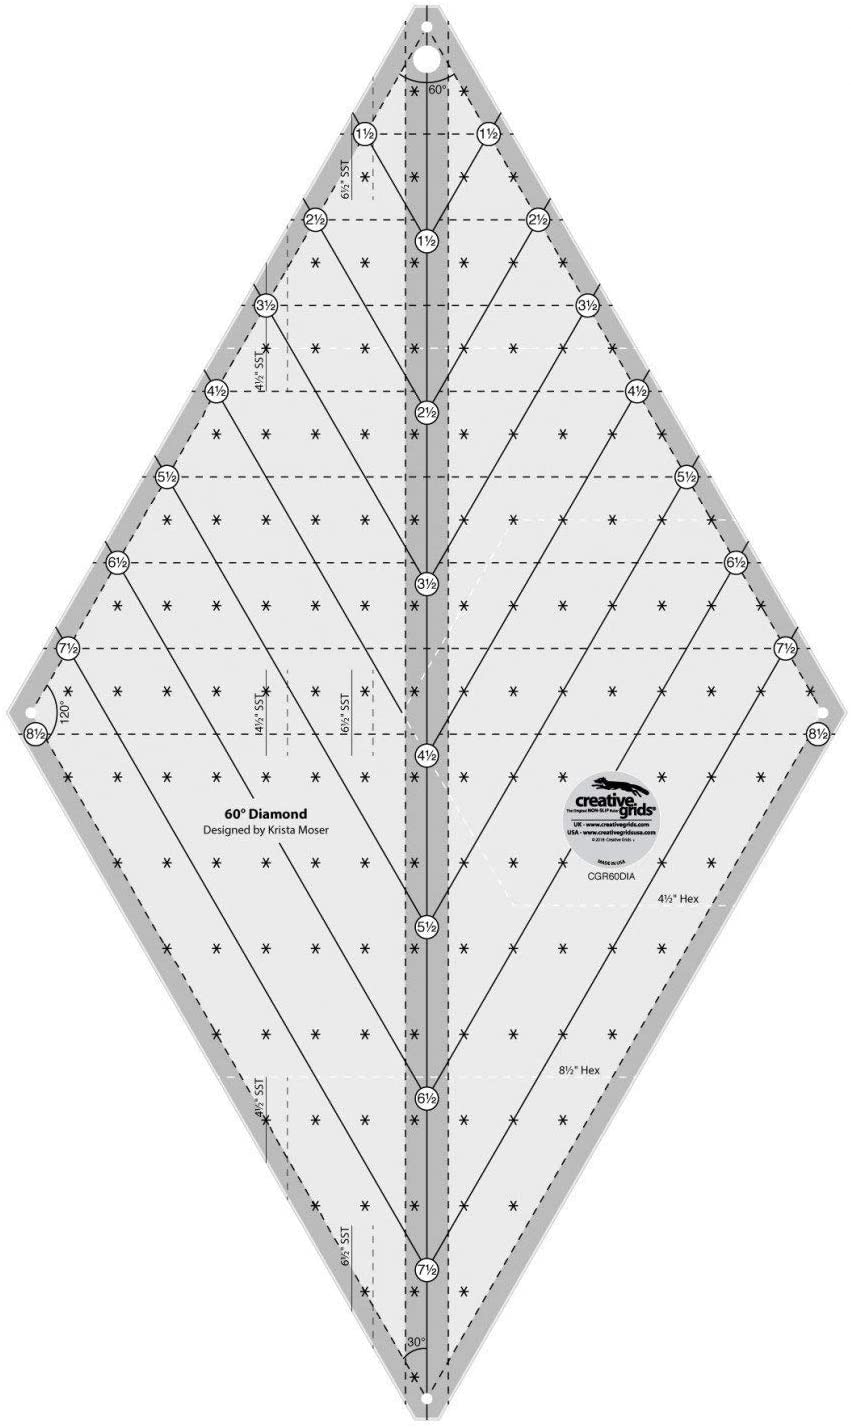 creative-grids-60-degree-diamond-quilting-ruler-template-designed-by